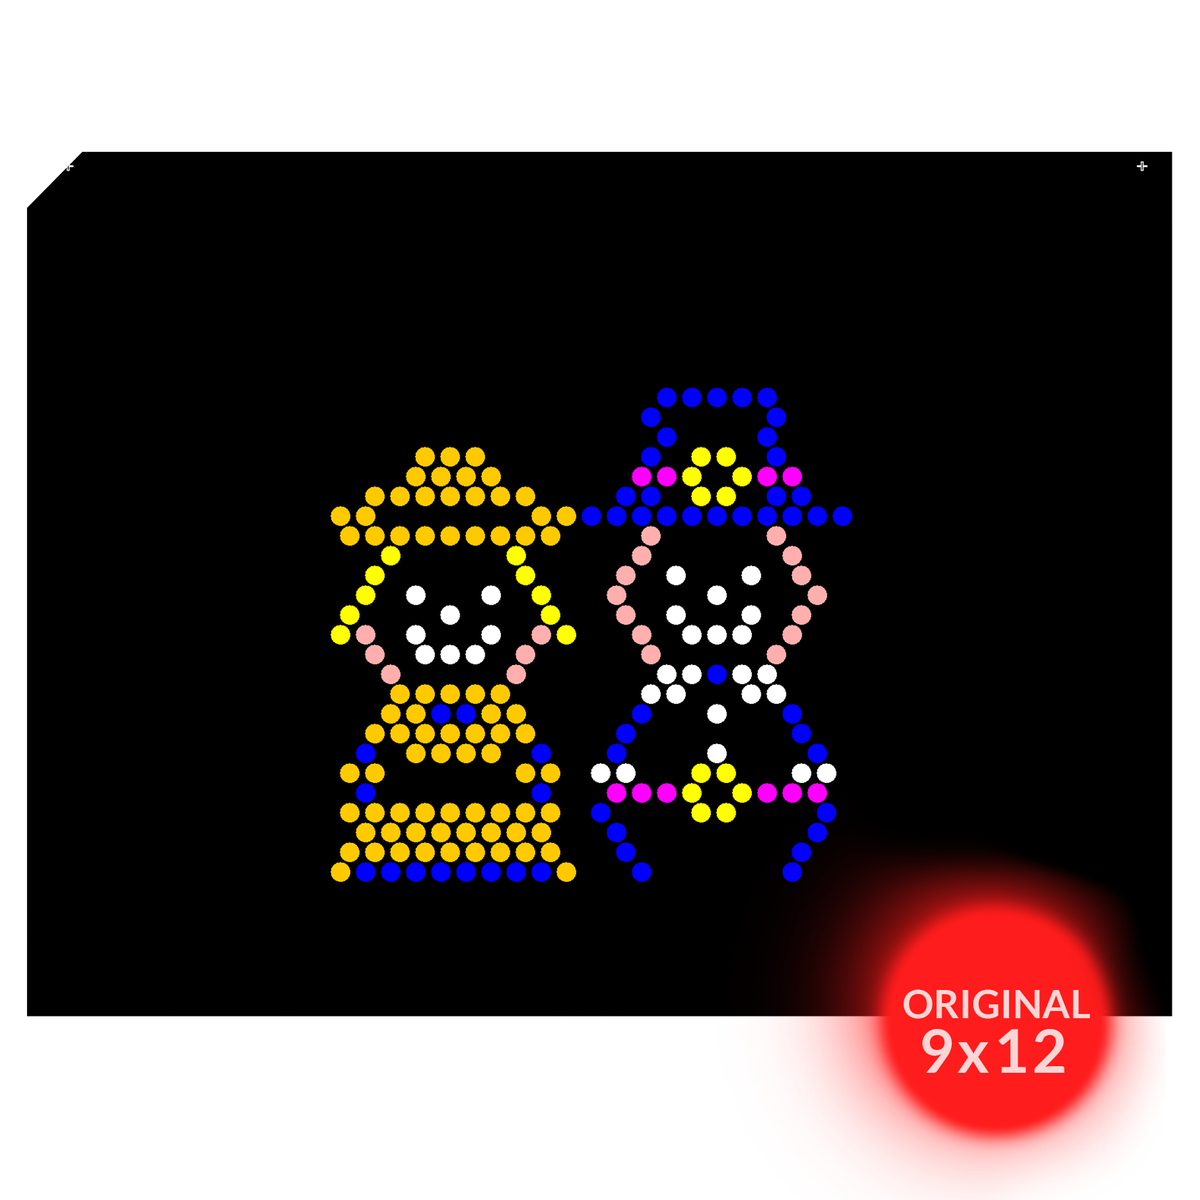 Lite Brite Poster for Sale by timetodieoldman